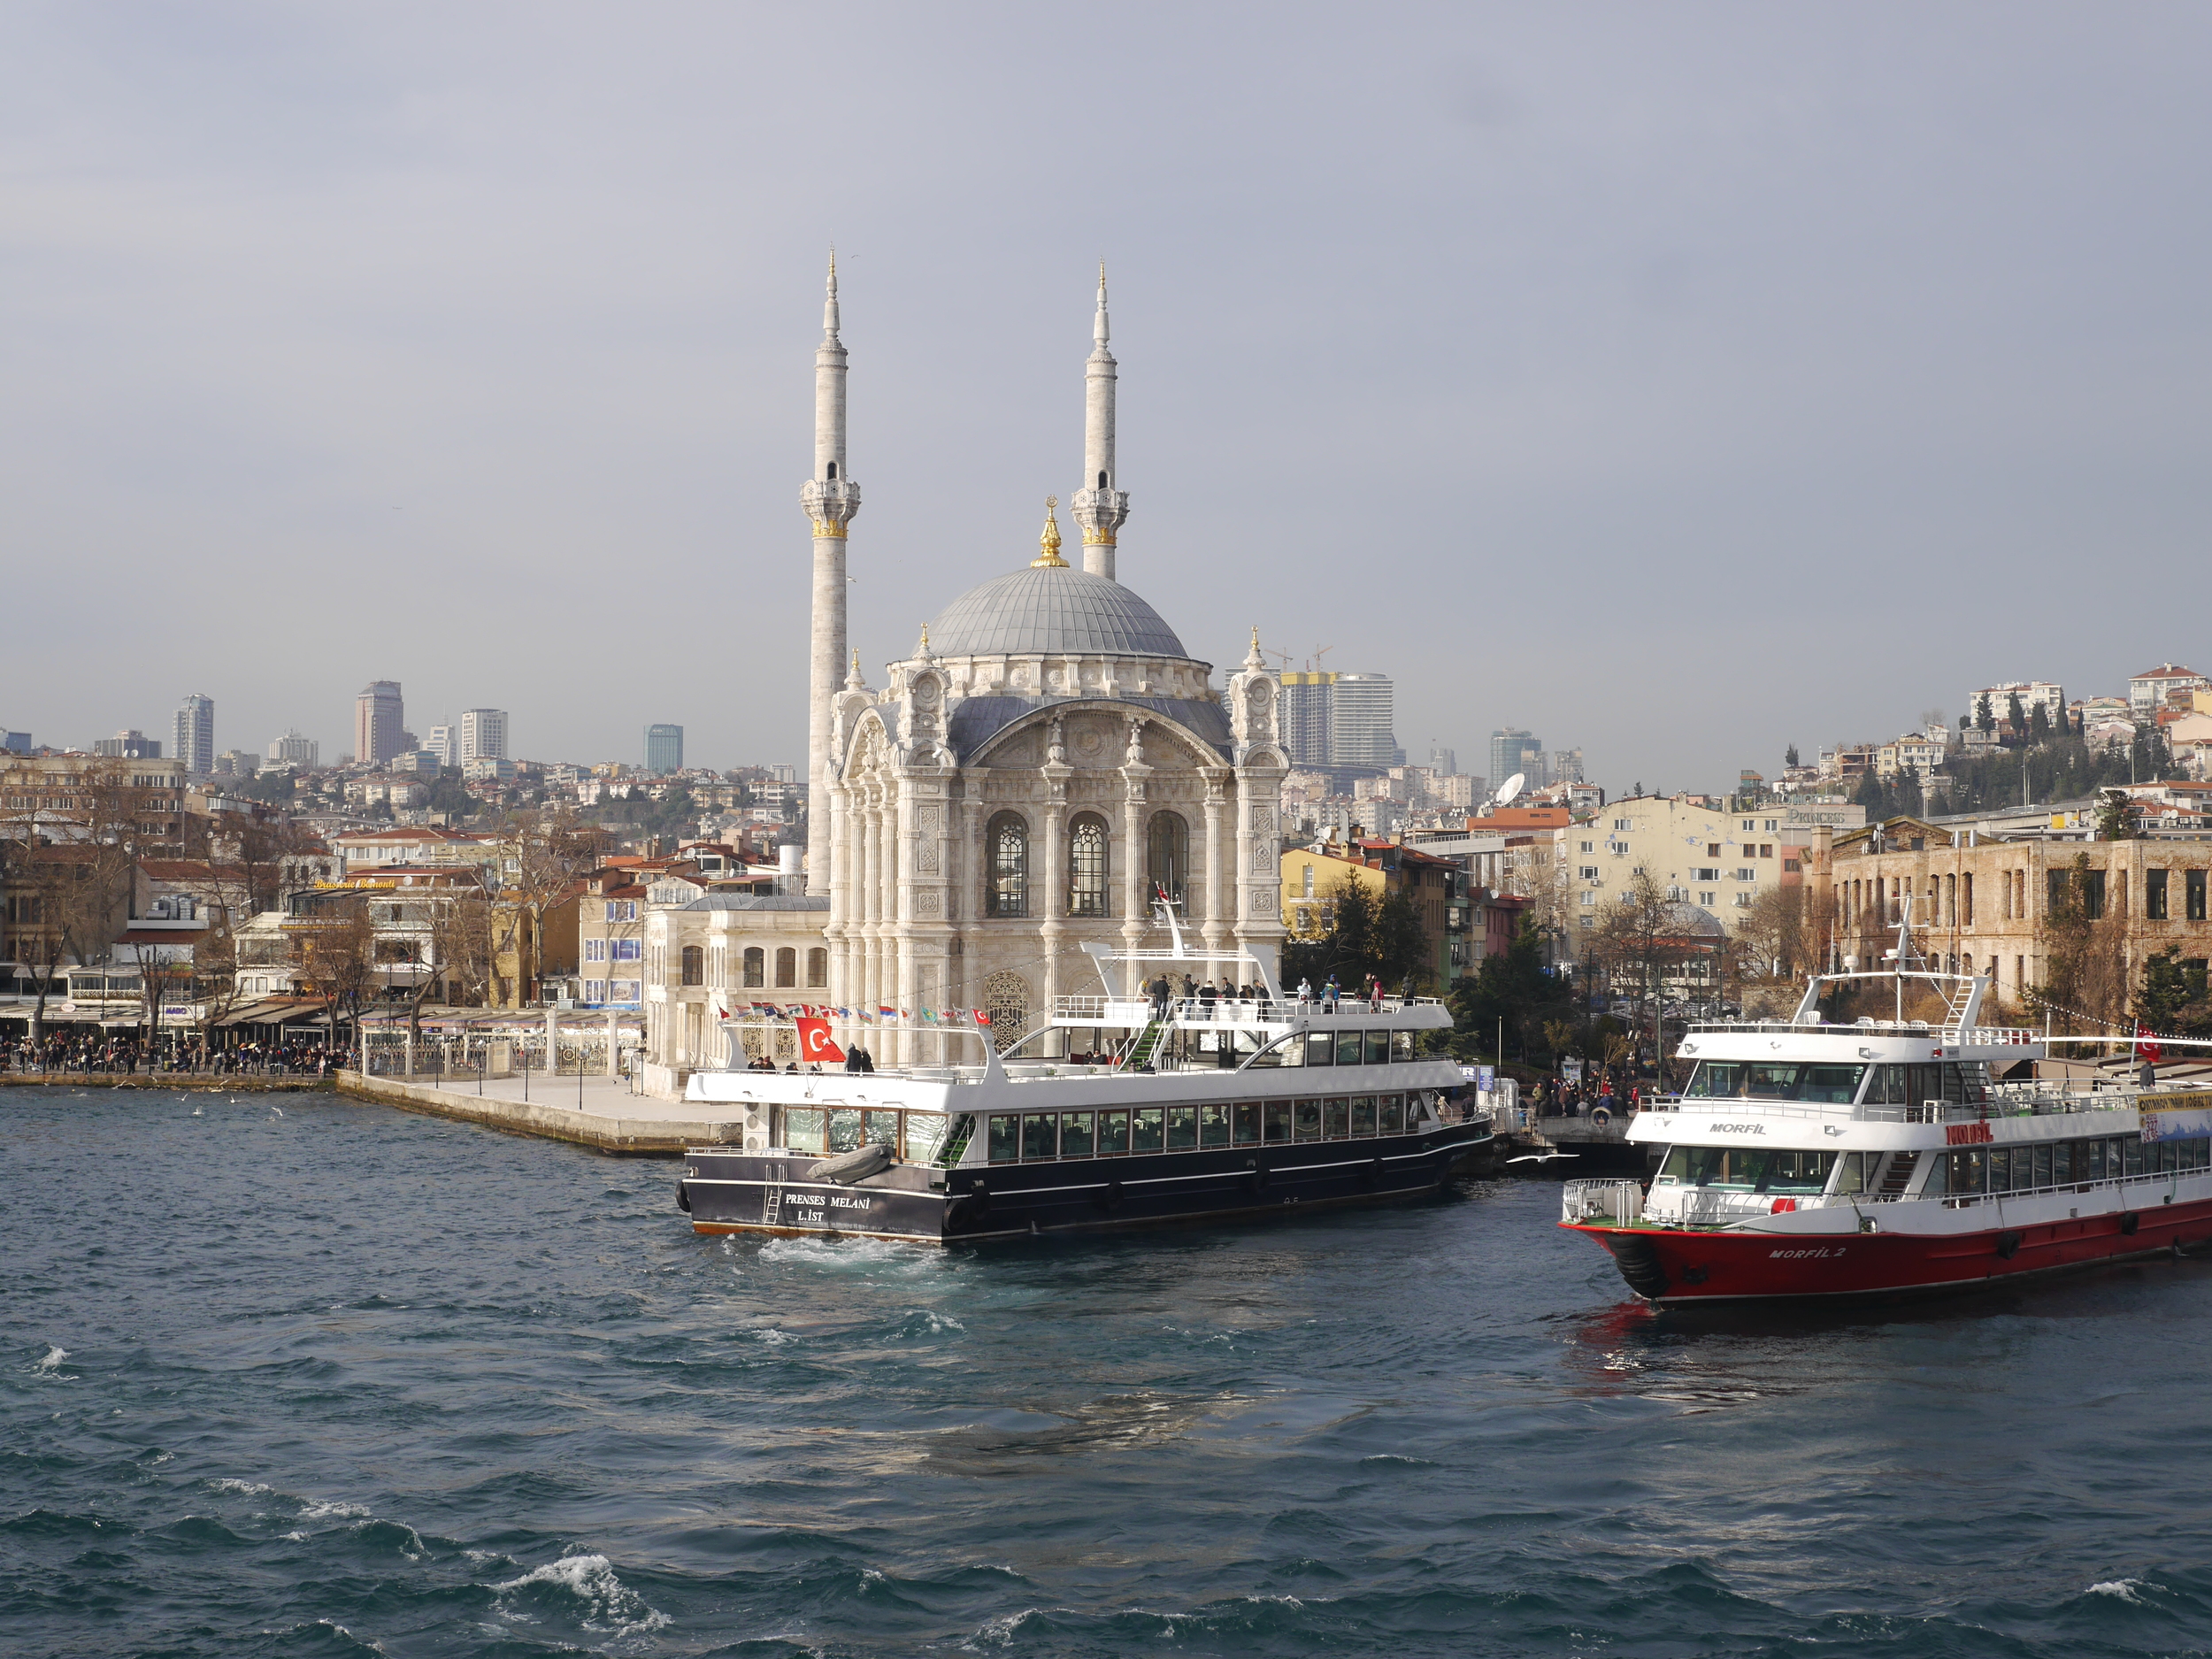  Another view of the Ortakoy Mosque. 